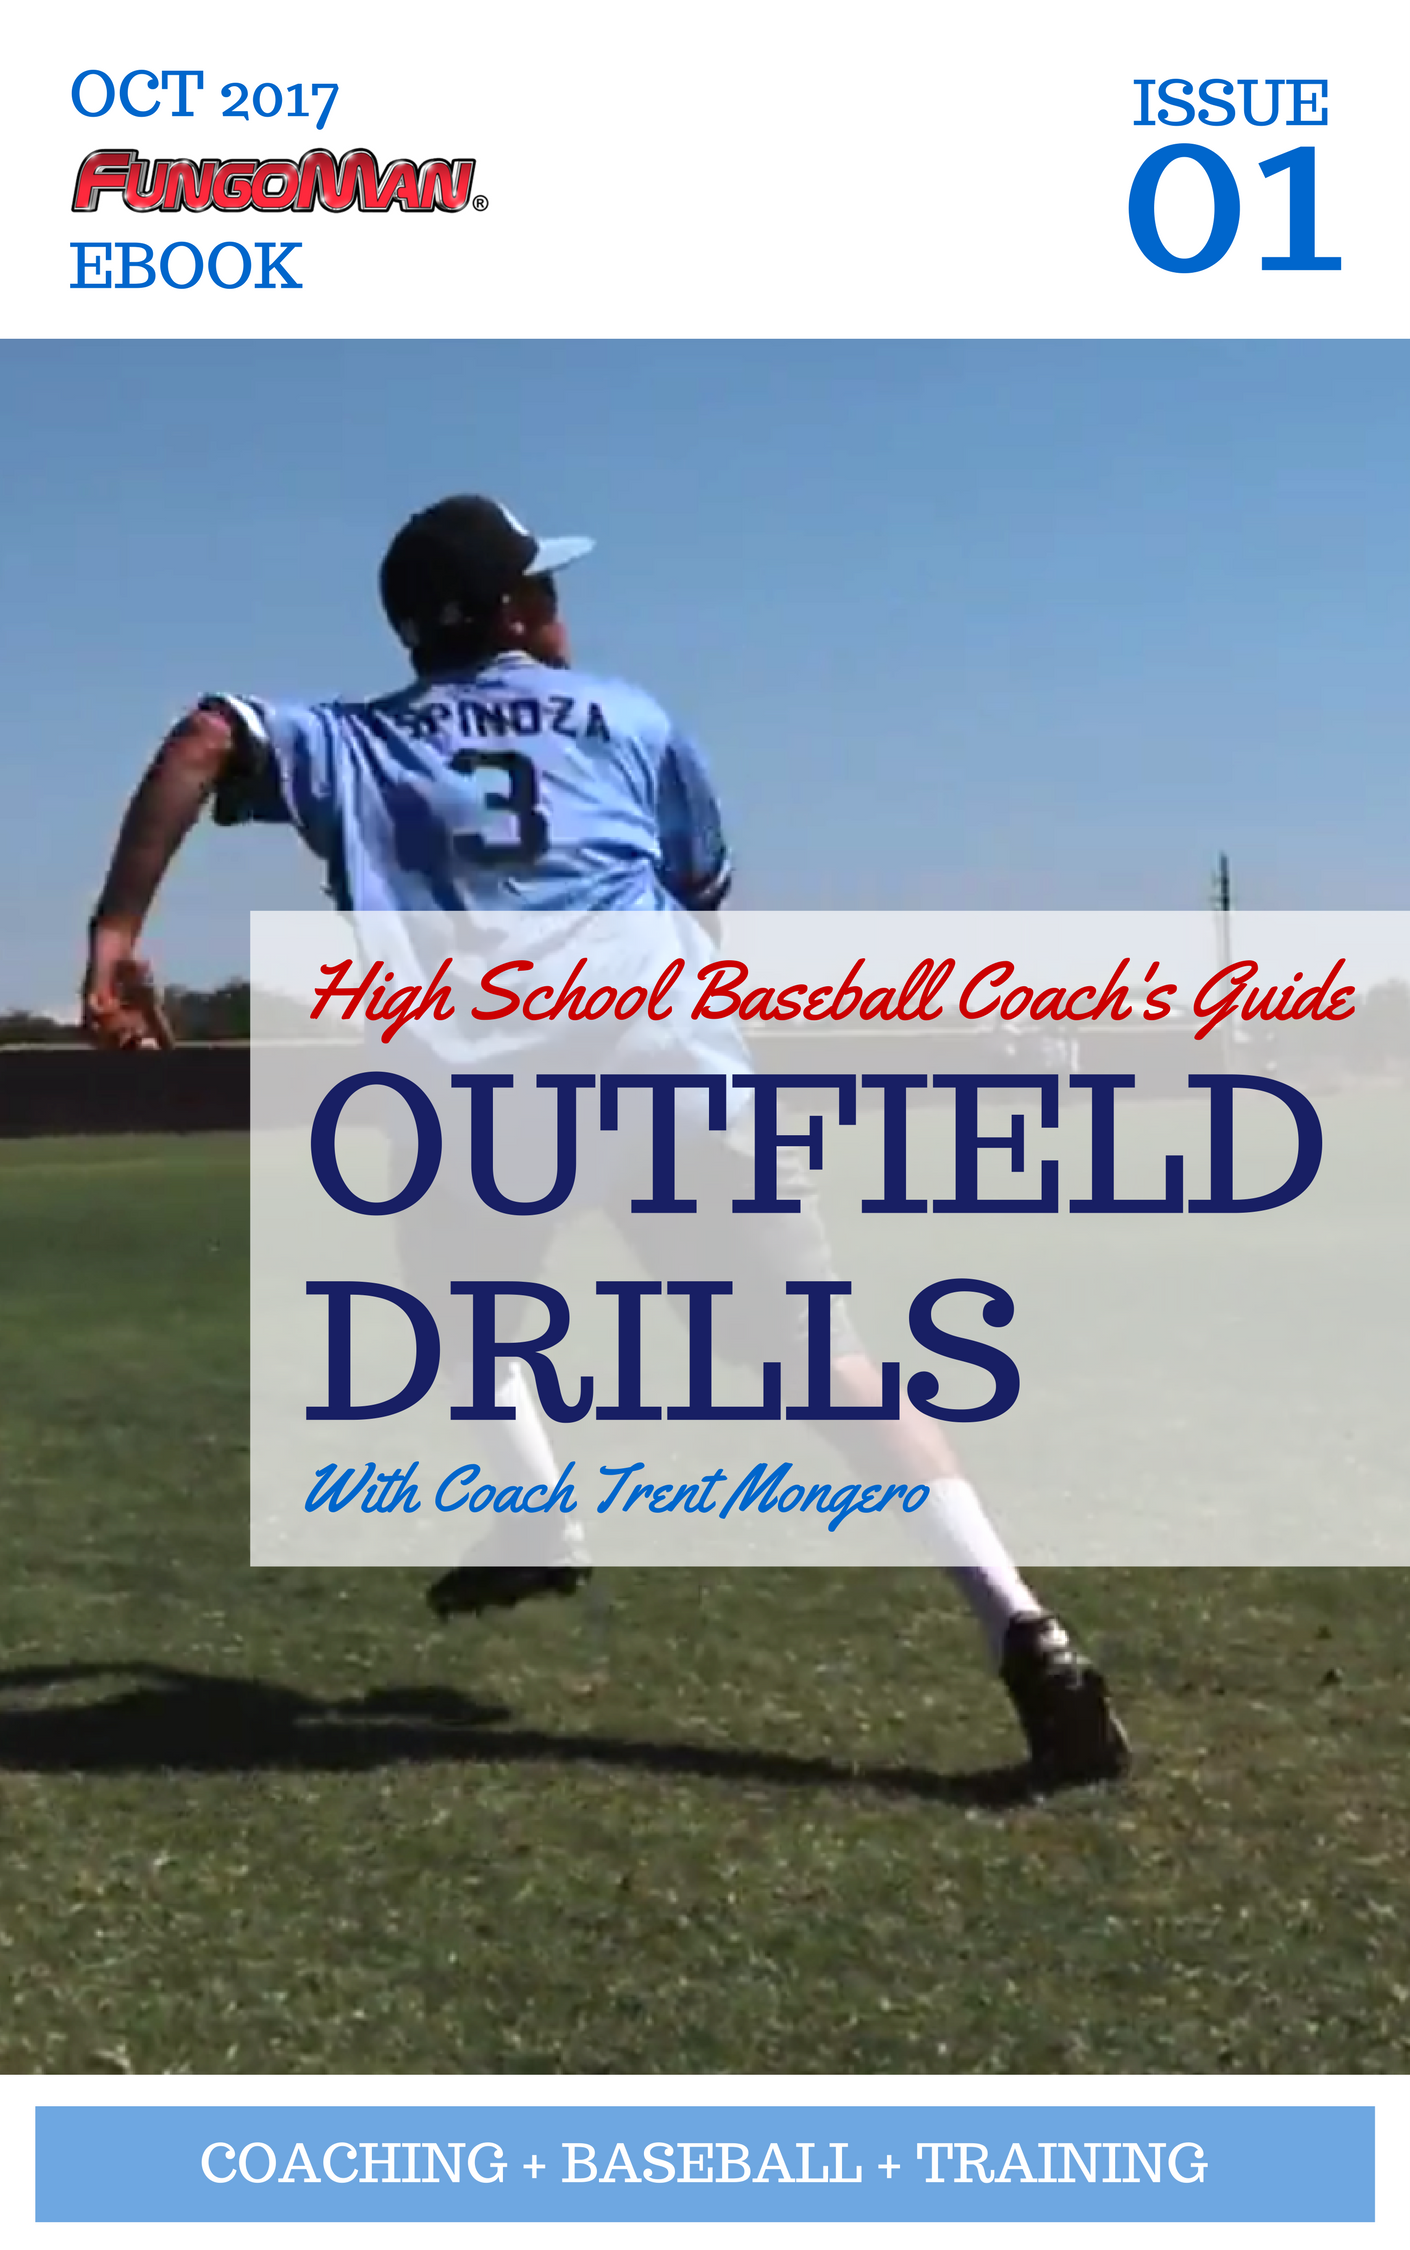 Outfield Drills eBook Cover.png